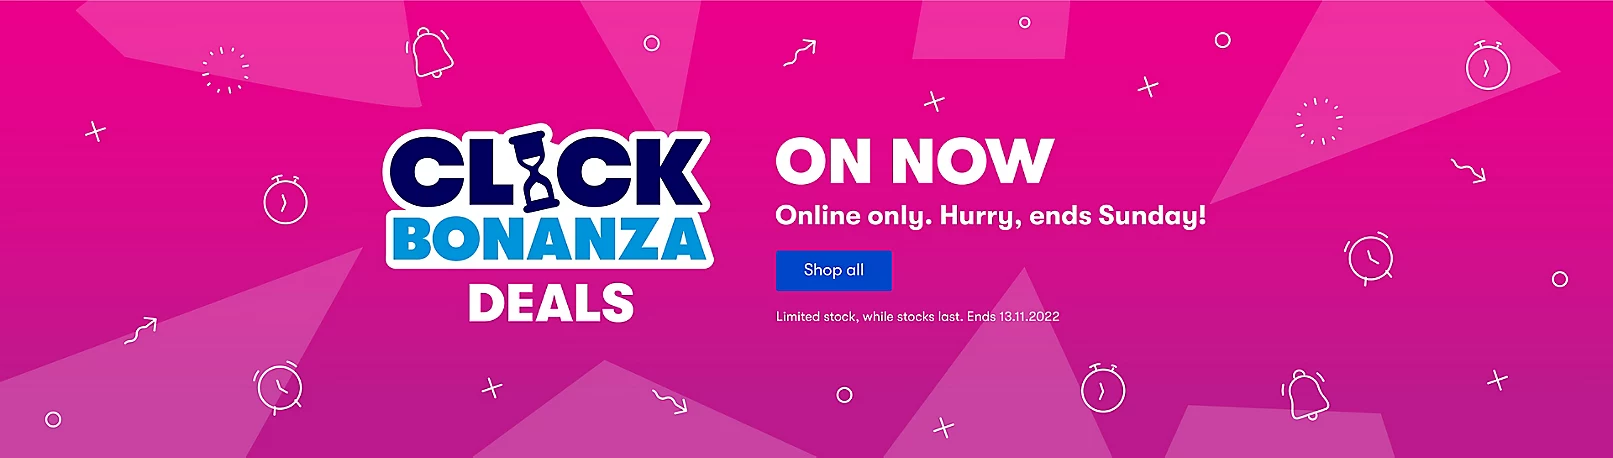 Big W Click Frenzy - Up to 50% OFF Bonds, Tefal, Sukin, Lynx, Colgate +  Free delivery $100+